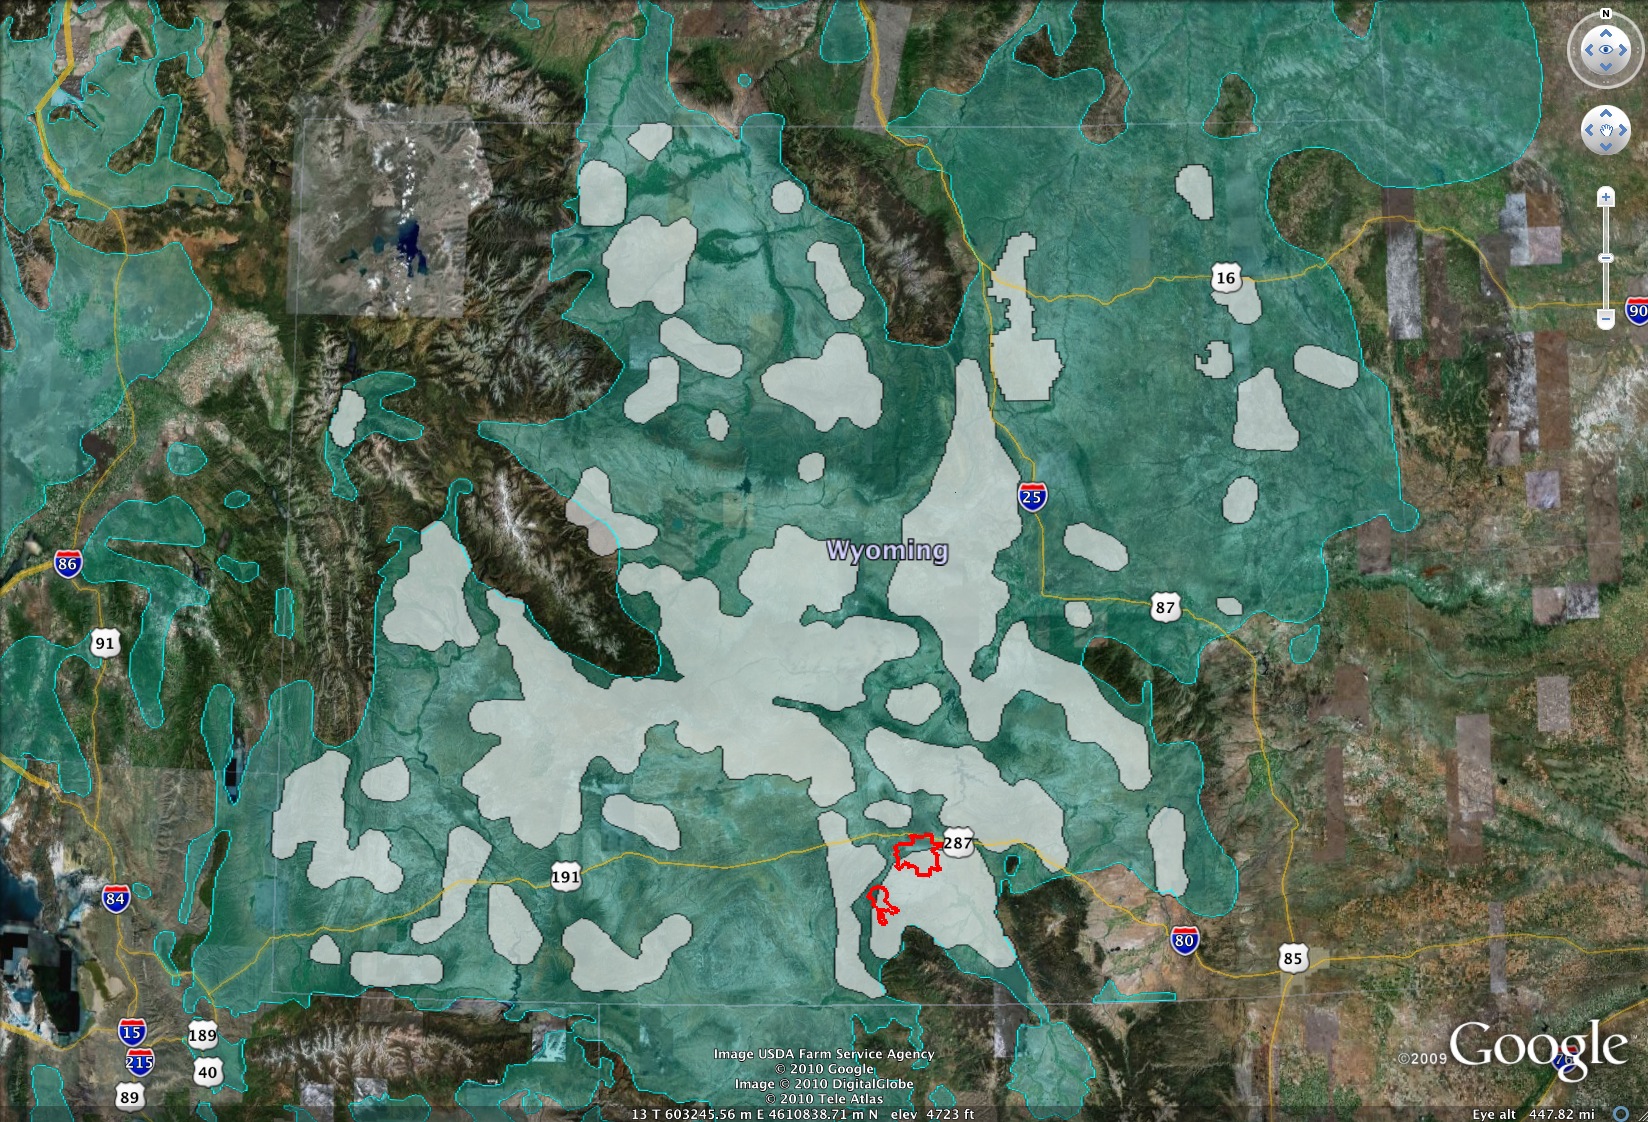 Project Area for Chokecherry and Sierra Madre Wind Energy with Wyoming Governor's Core Area mapping